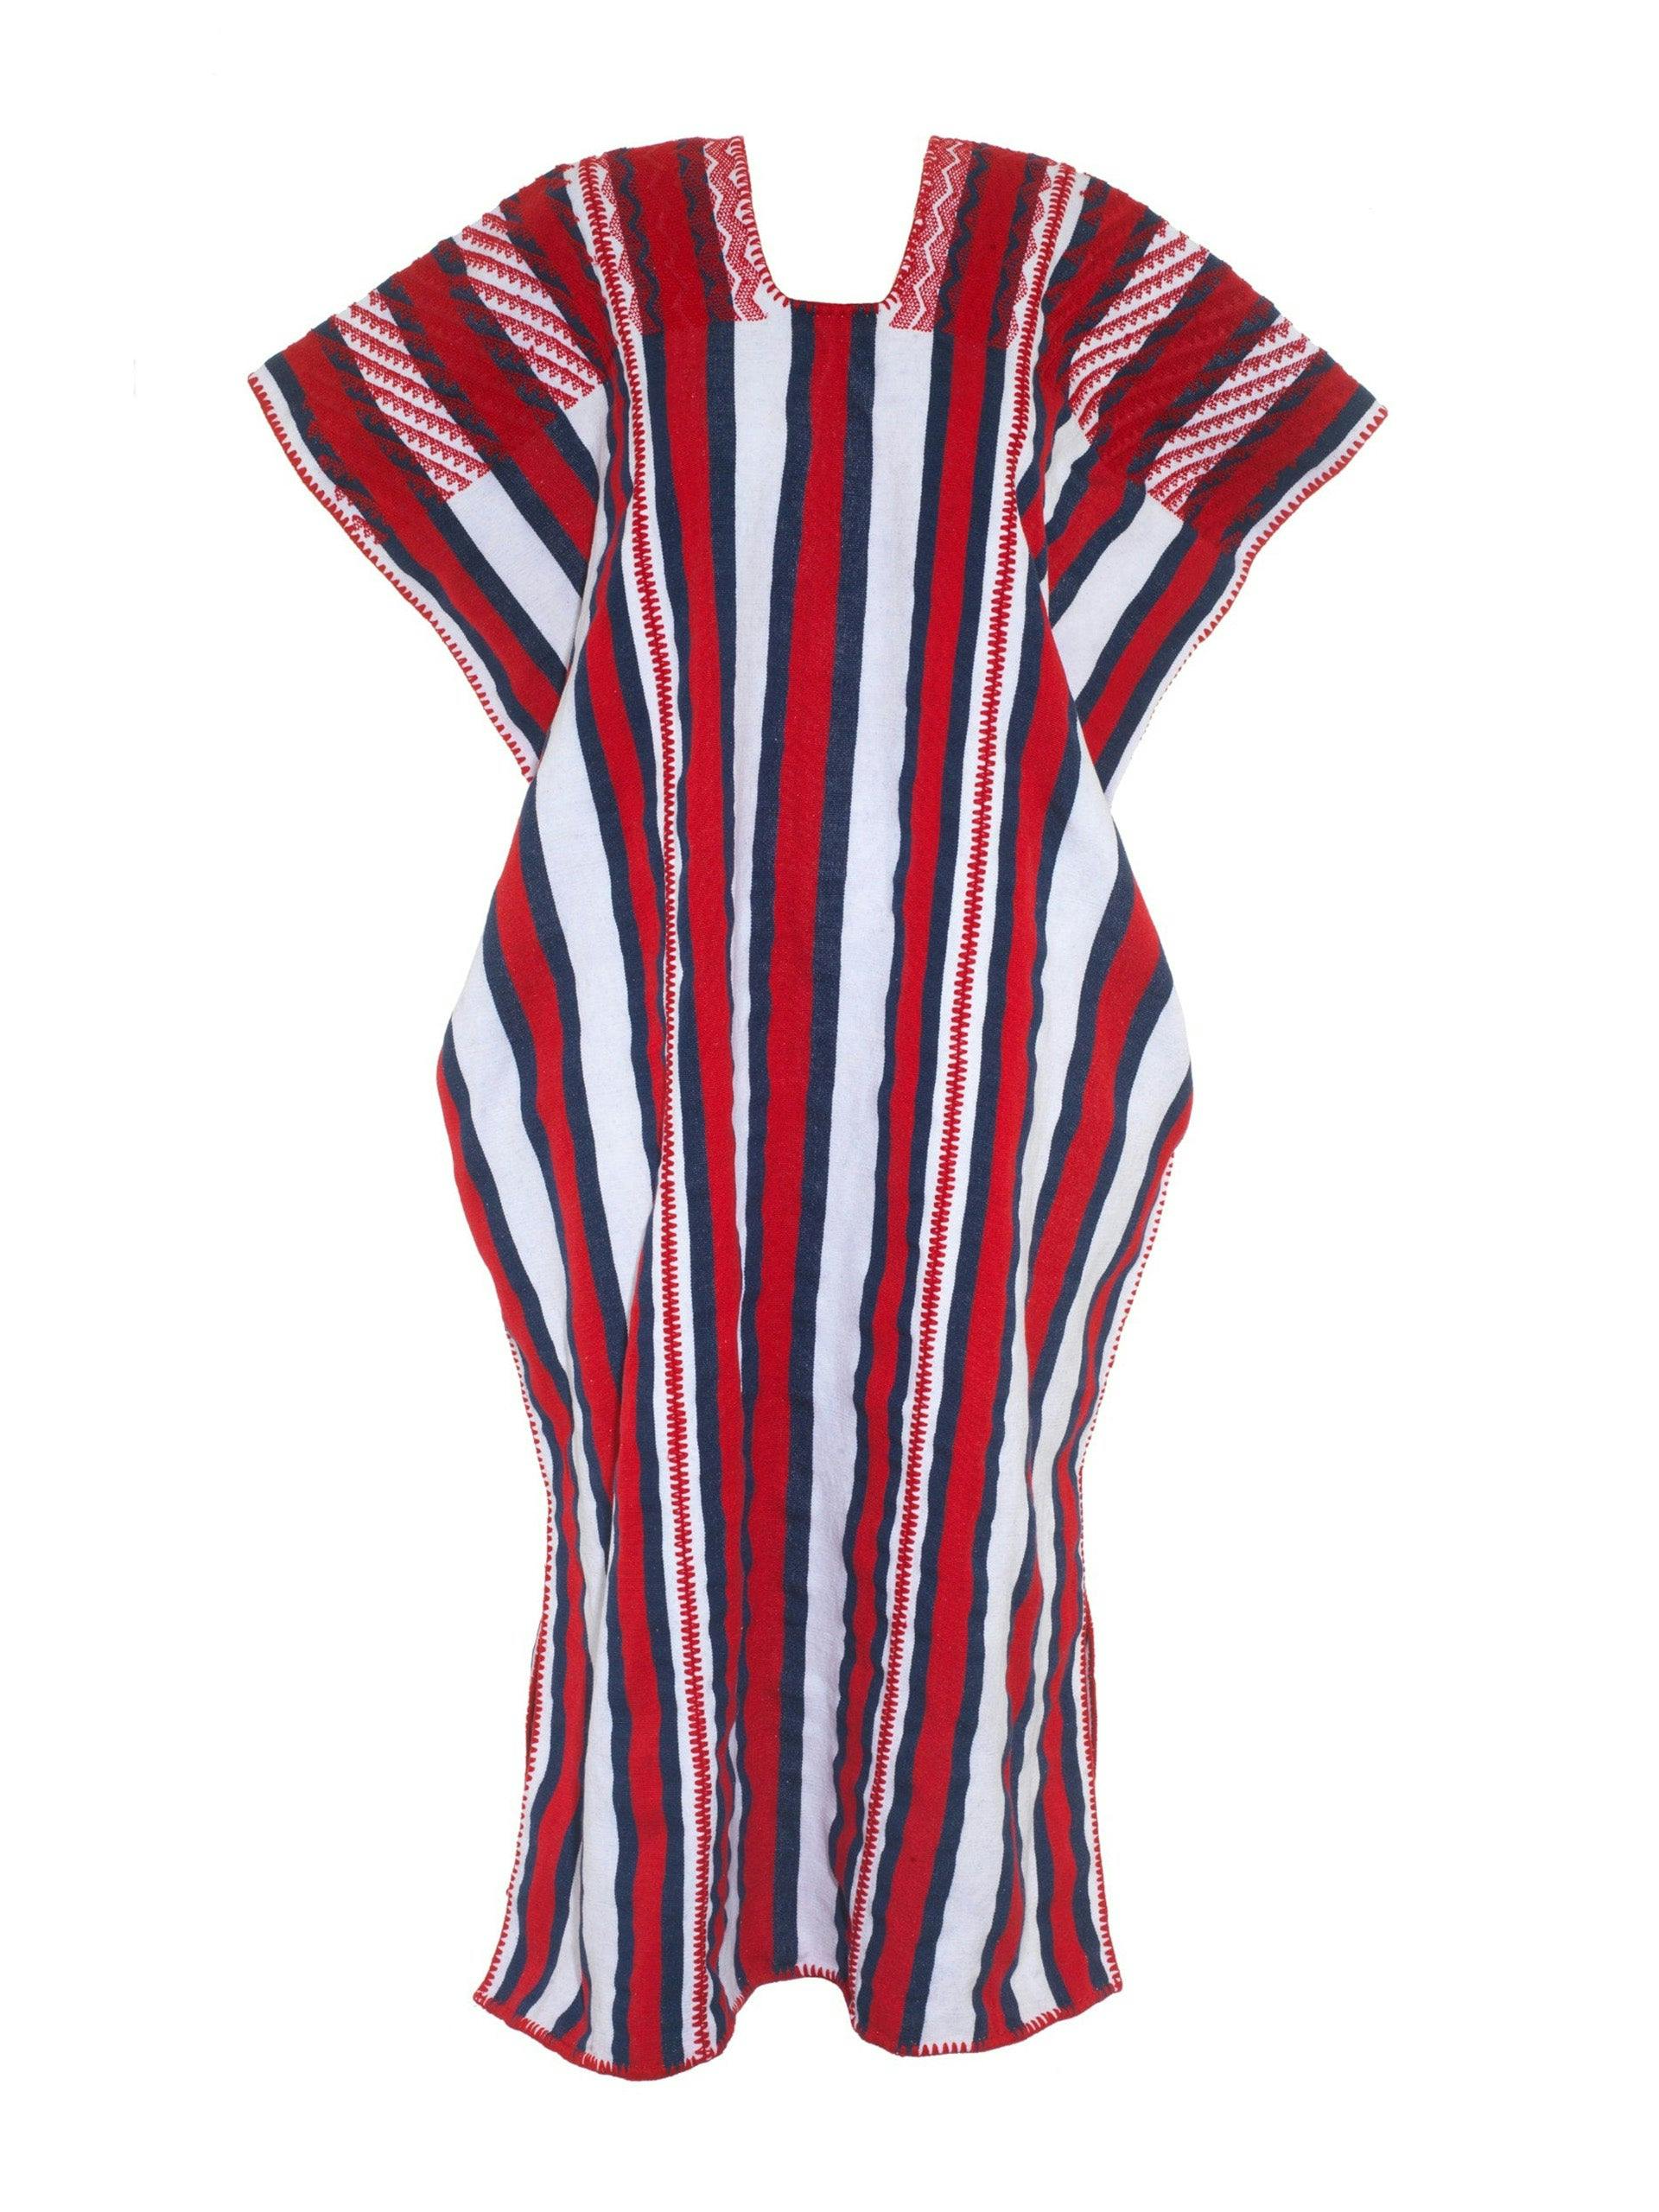 Three panel midi kaftan in red, white and navy stripes